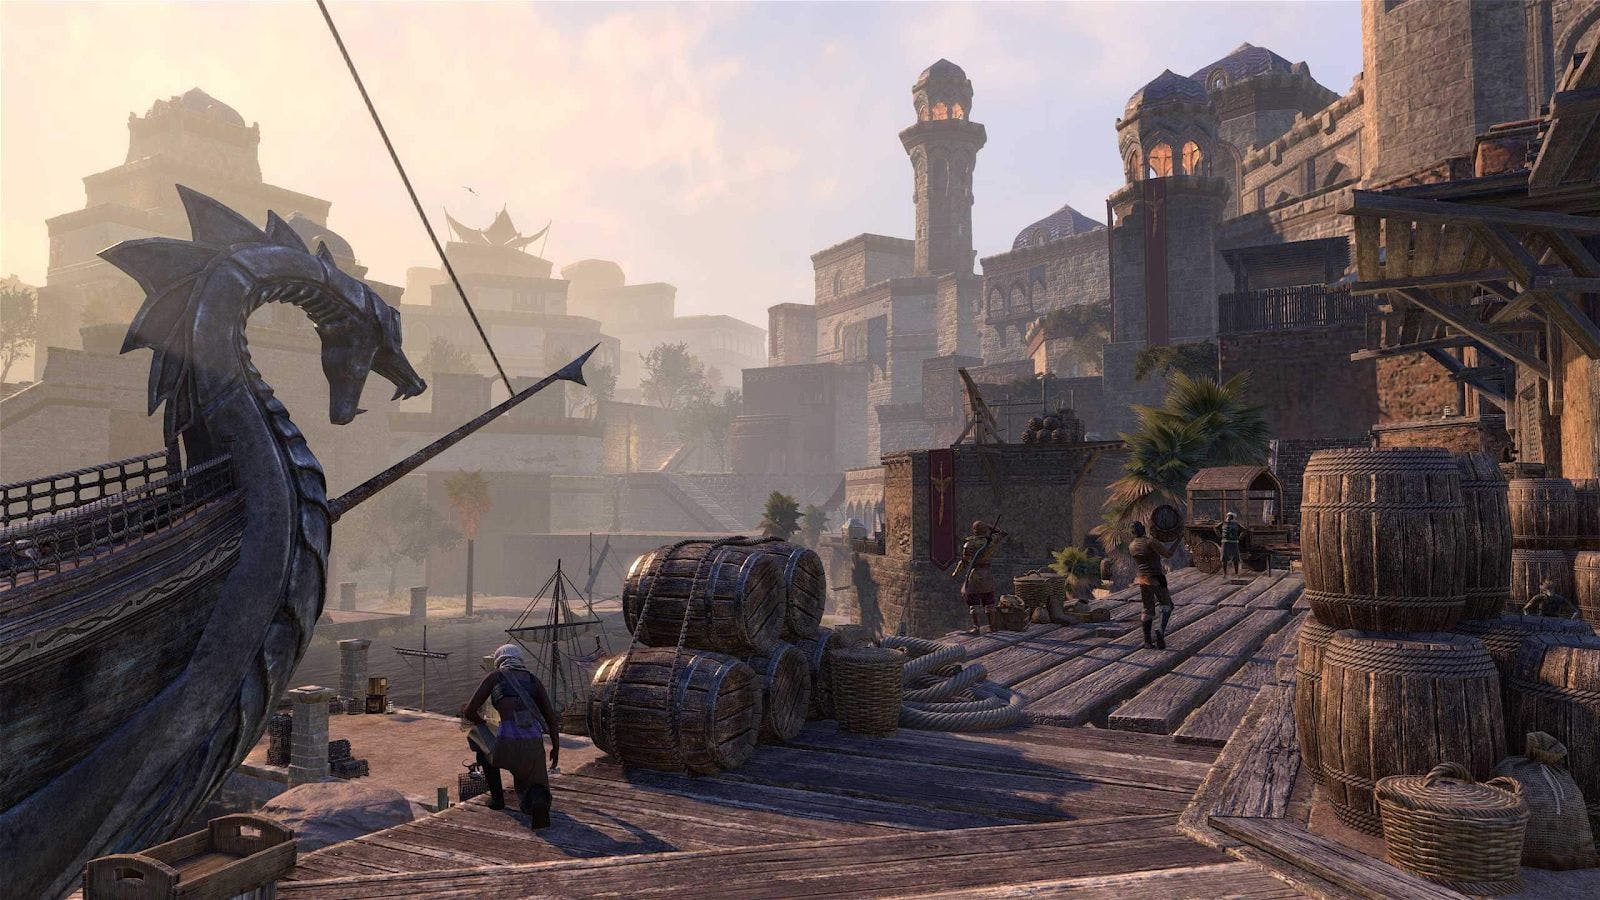 /the-elder-scrolls-online-console-enhanced-version-arrives-to-next-gen-systems-o0p3355 feature image